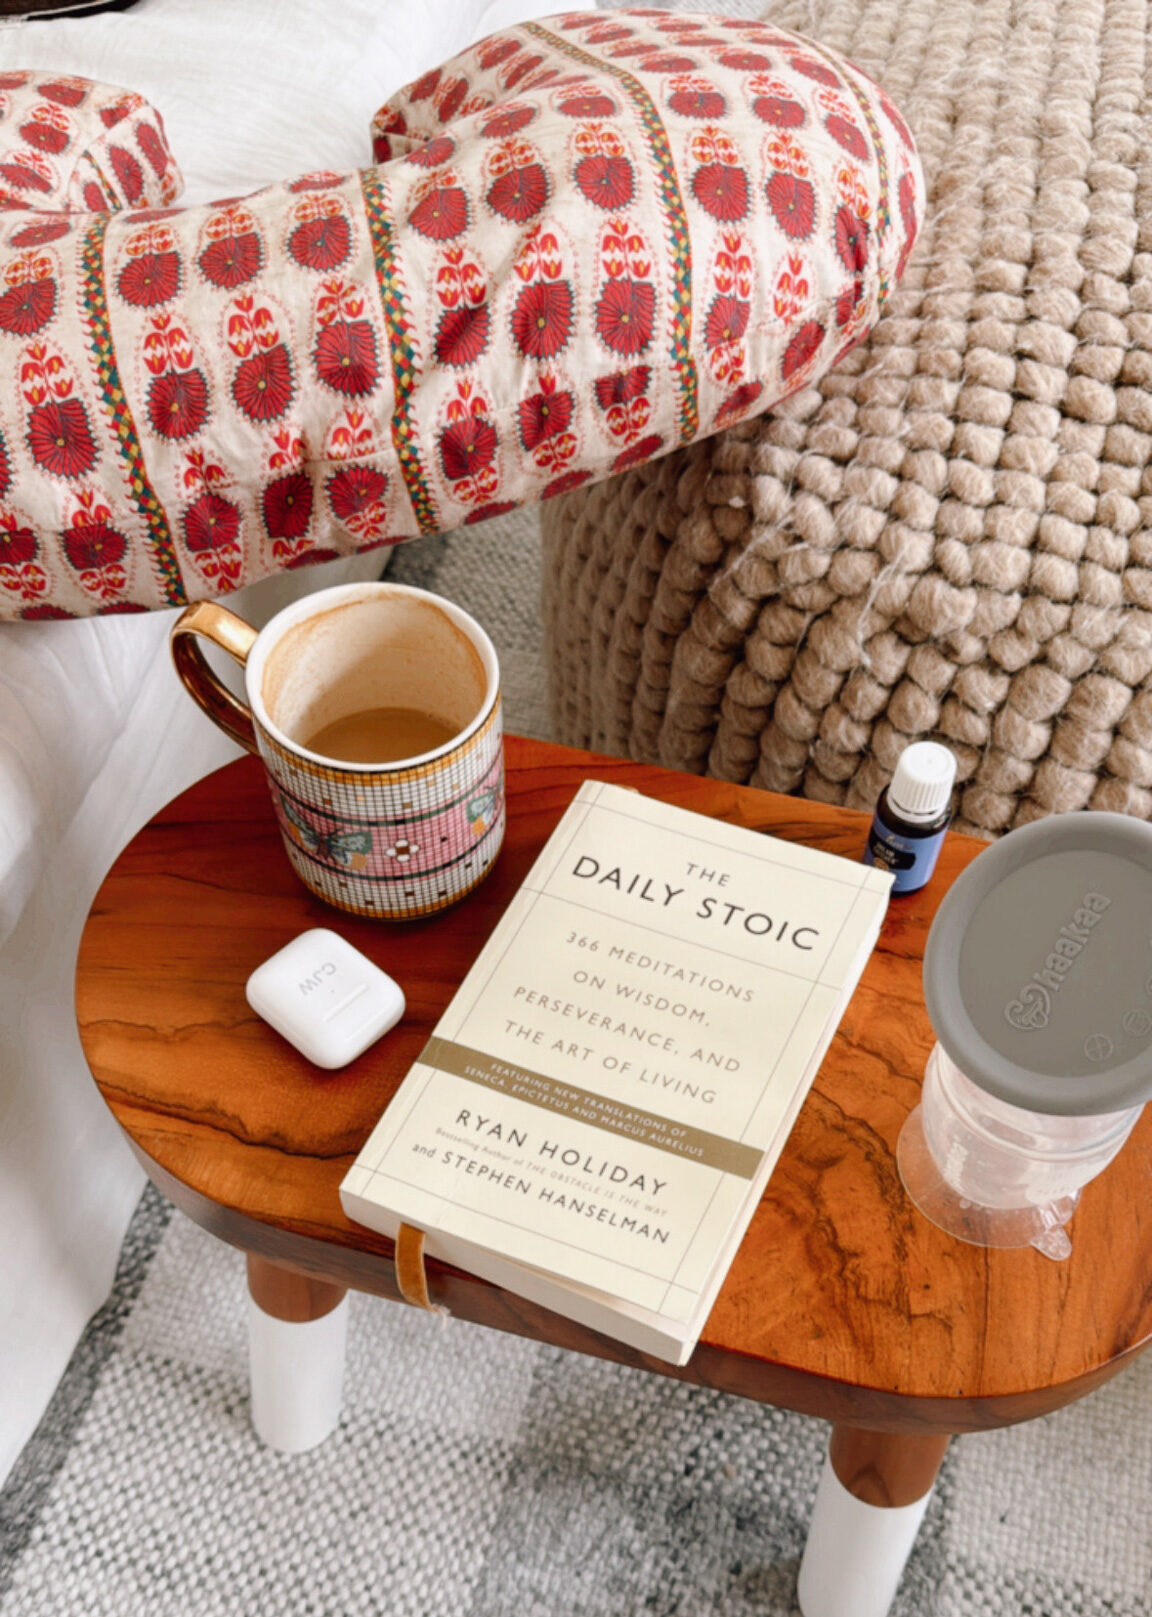 the daily stoic book, coffee, EarPods, hakaa breast pump, boppy pillow in living room